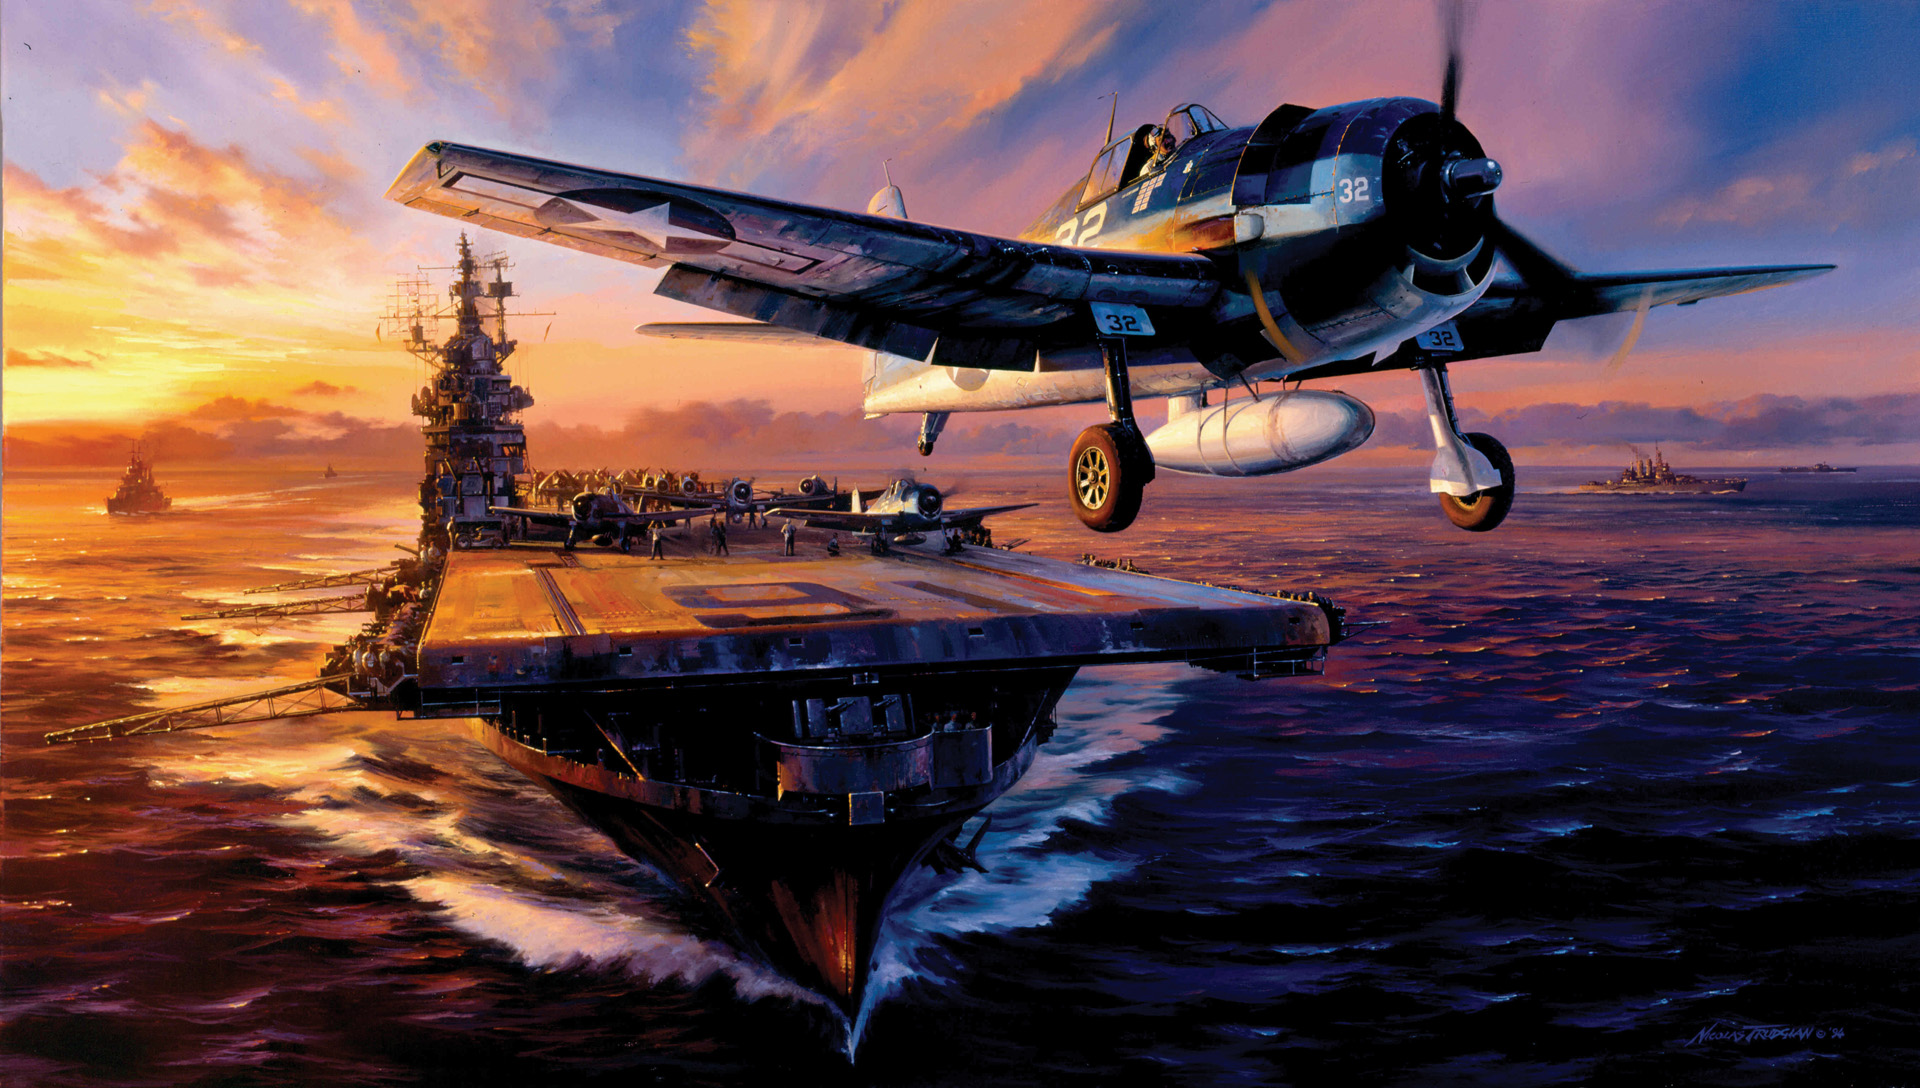 U.S. Navy Lieutenant Alex Vraciu, who shot down six Japanese aircraft in the Battle of the Philippine Sea, takes off in his F6F Hellcat from the deck of the USS Lexington in a painting by Nicolas Trudgian. By 1944 the Japanese carrier fleet had only half the number of aircraft of the United States, making it highly unlikely they would reverse the tide of the War in the Pacific.